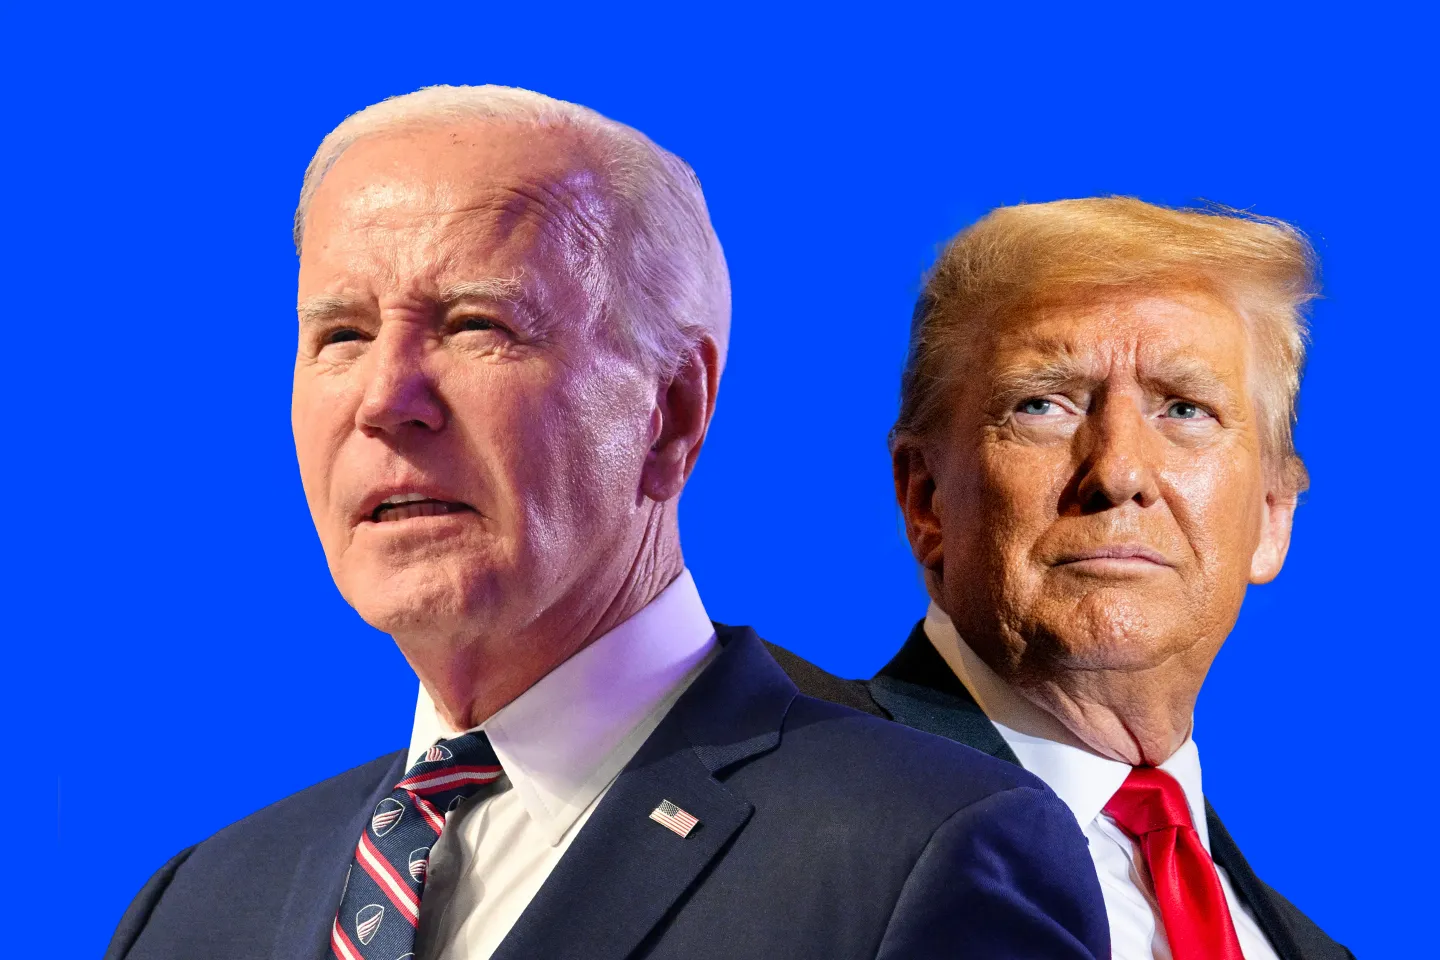 Voters will likely be choosing between two candidates of advanced age—President Joe Biden (left) and former President Donald Trump—in this year’s U.S. election.